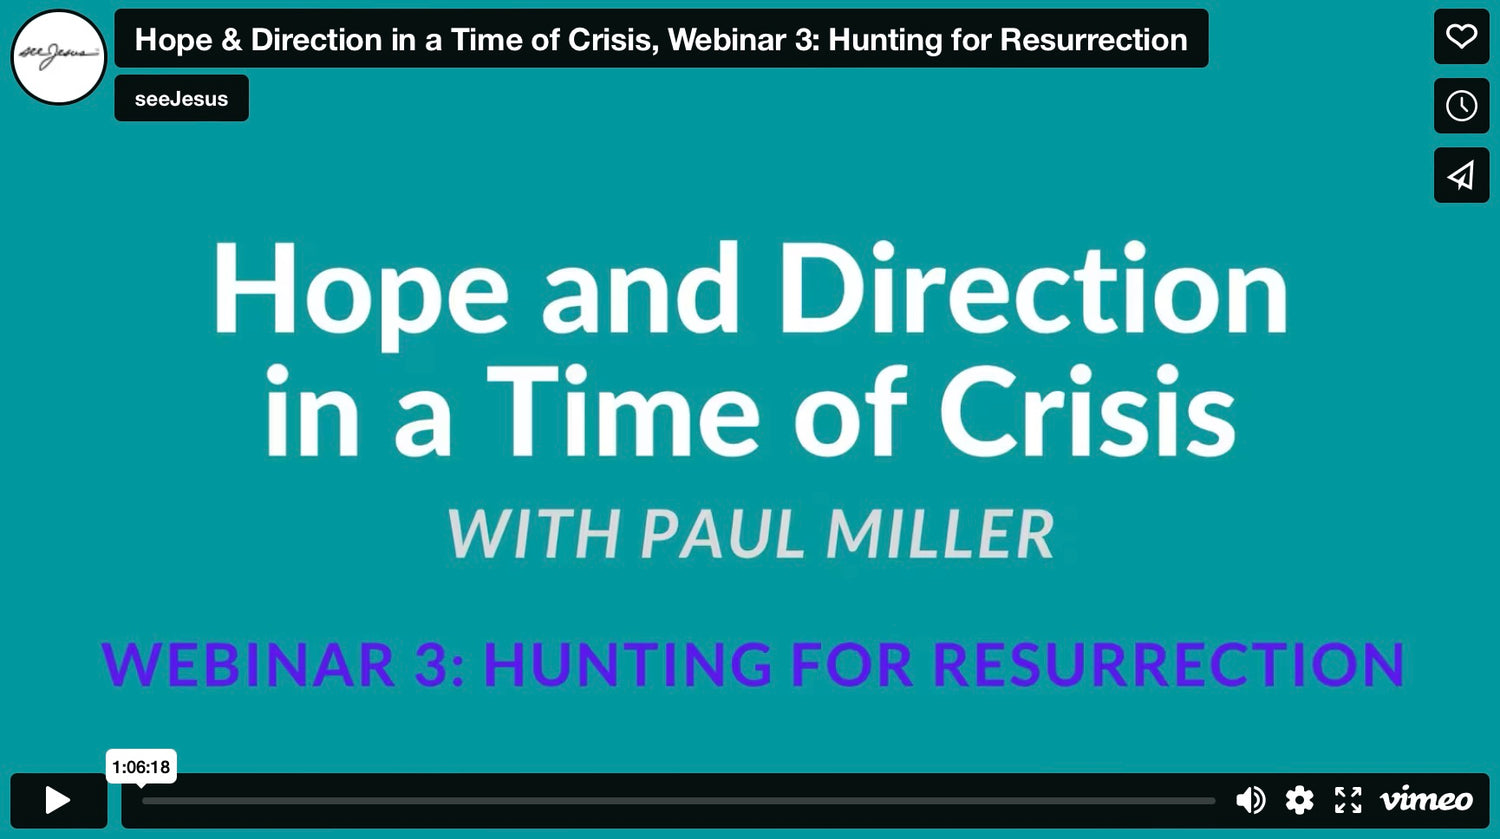 Hunting for Resurrection: Hope & Direction in a Time of Crisis, Webinar 3